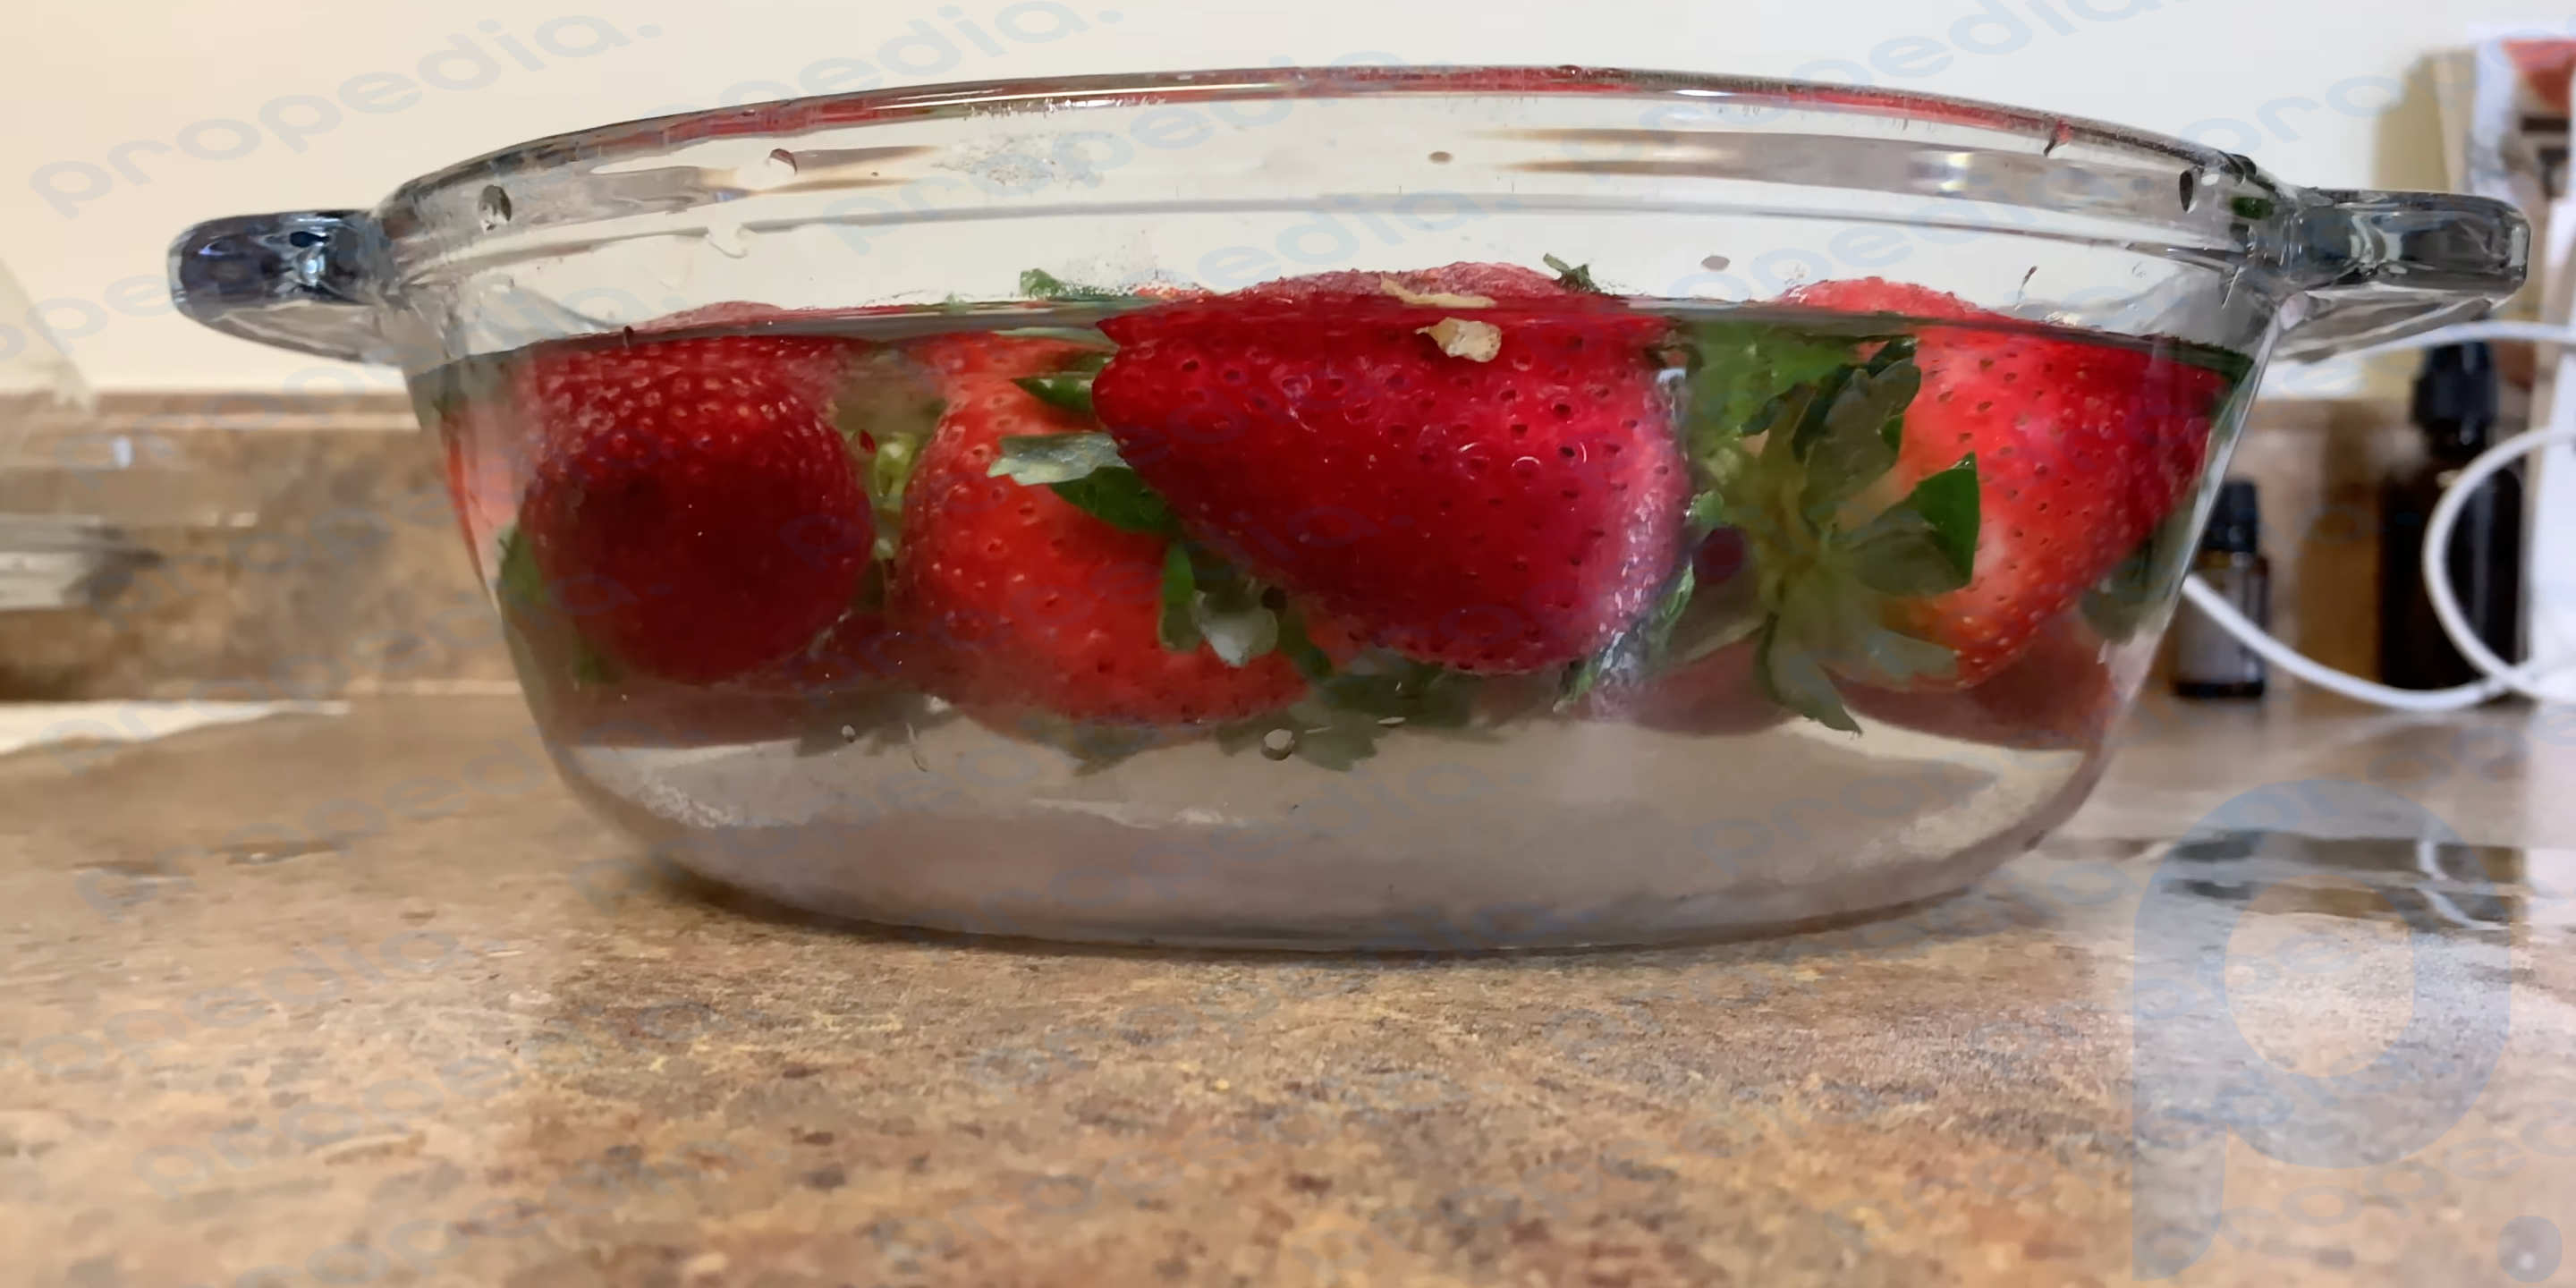 How to properly wash strawberries with baking soda